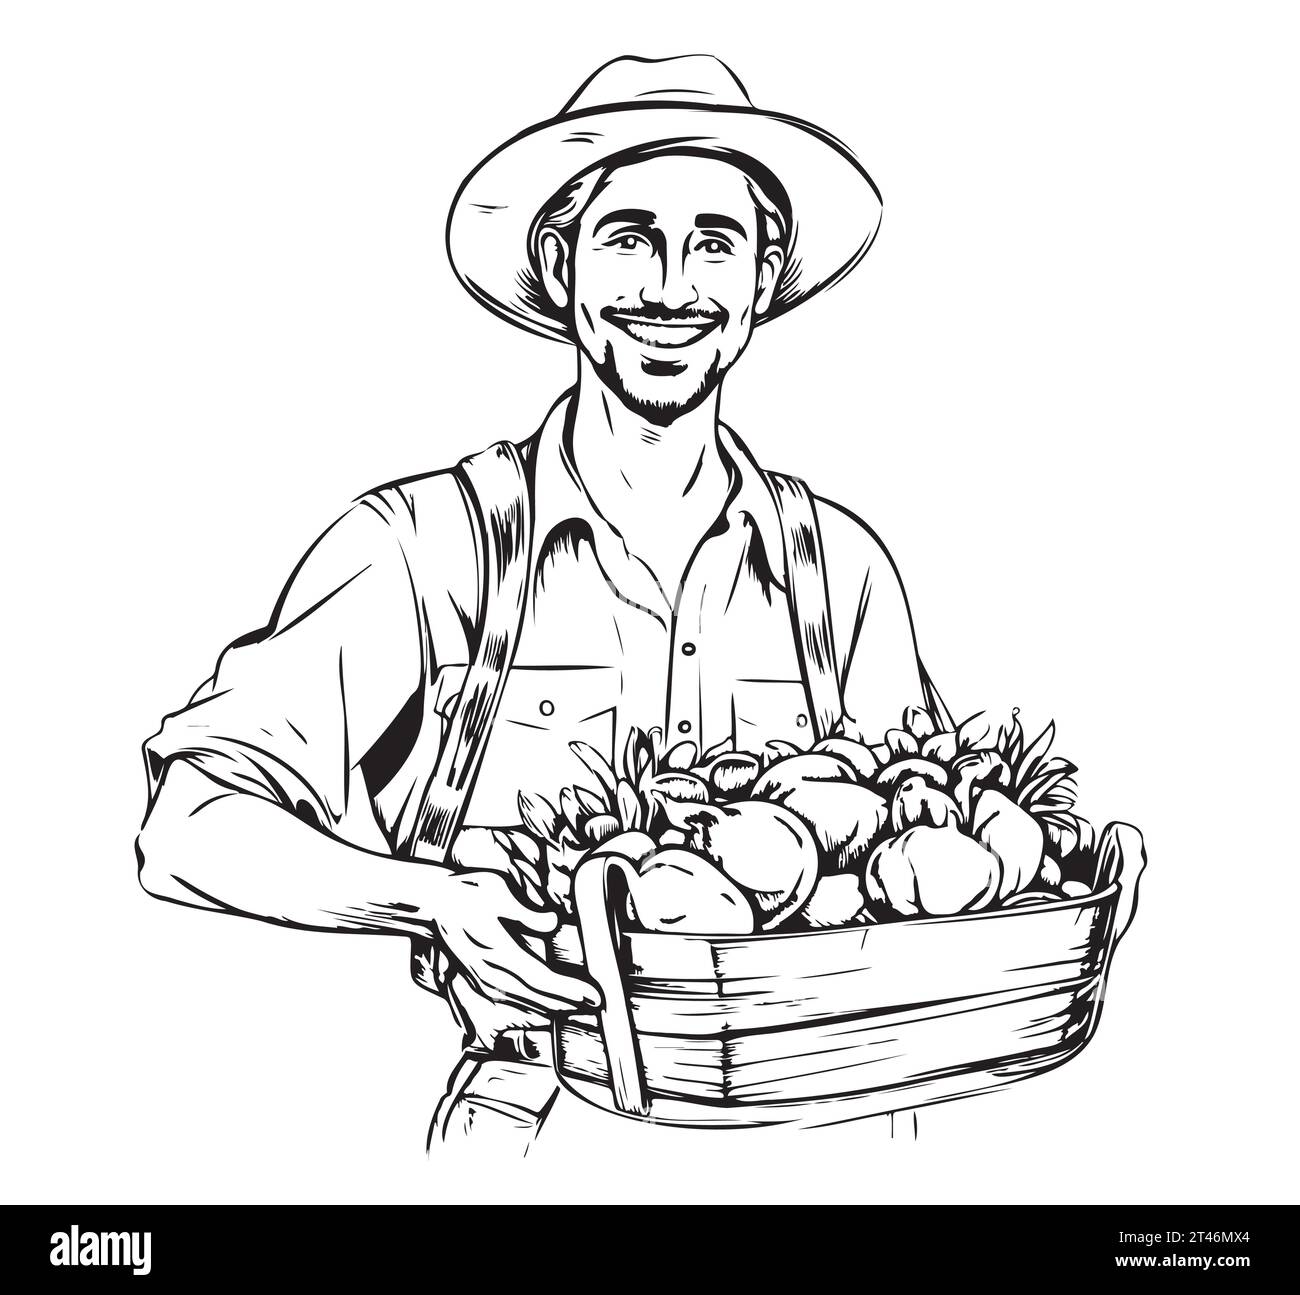 FREE! - Fruit Basket Picture For Colouring | Colouring Sheets